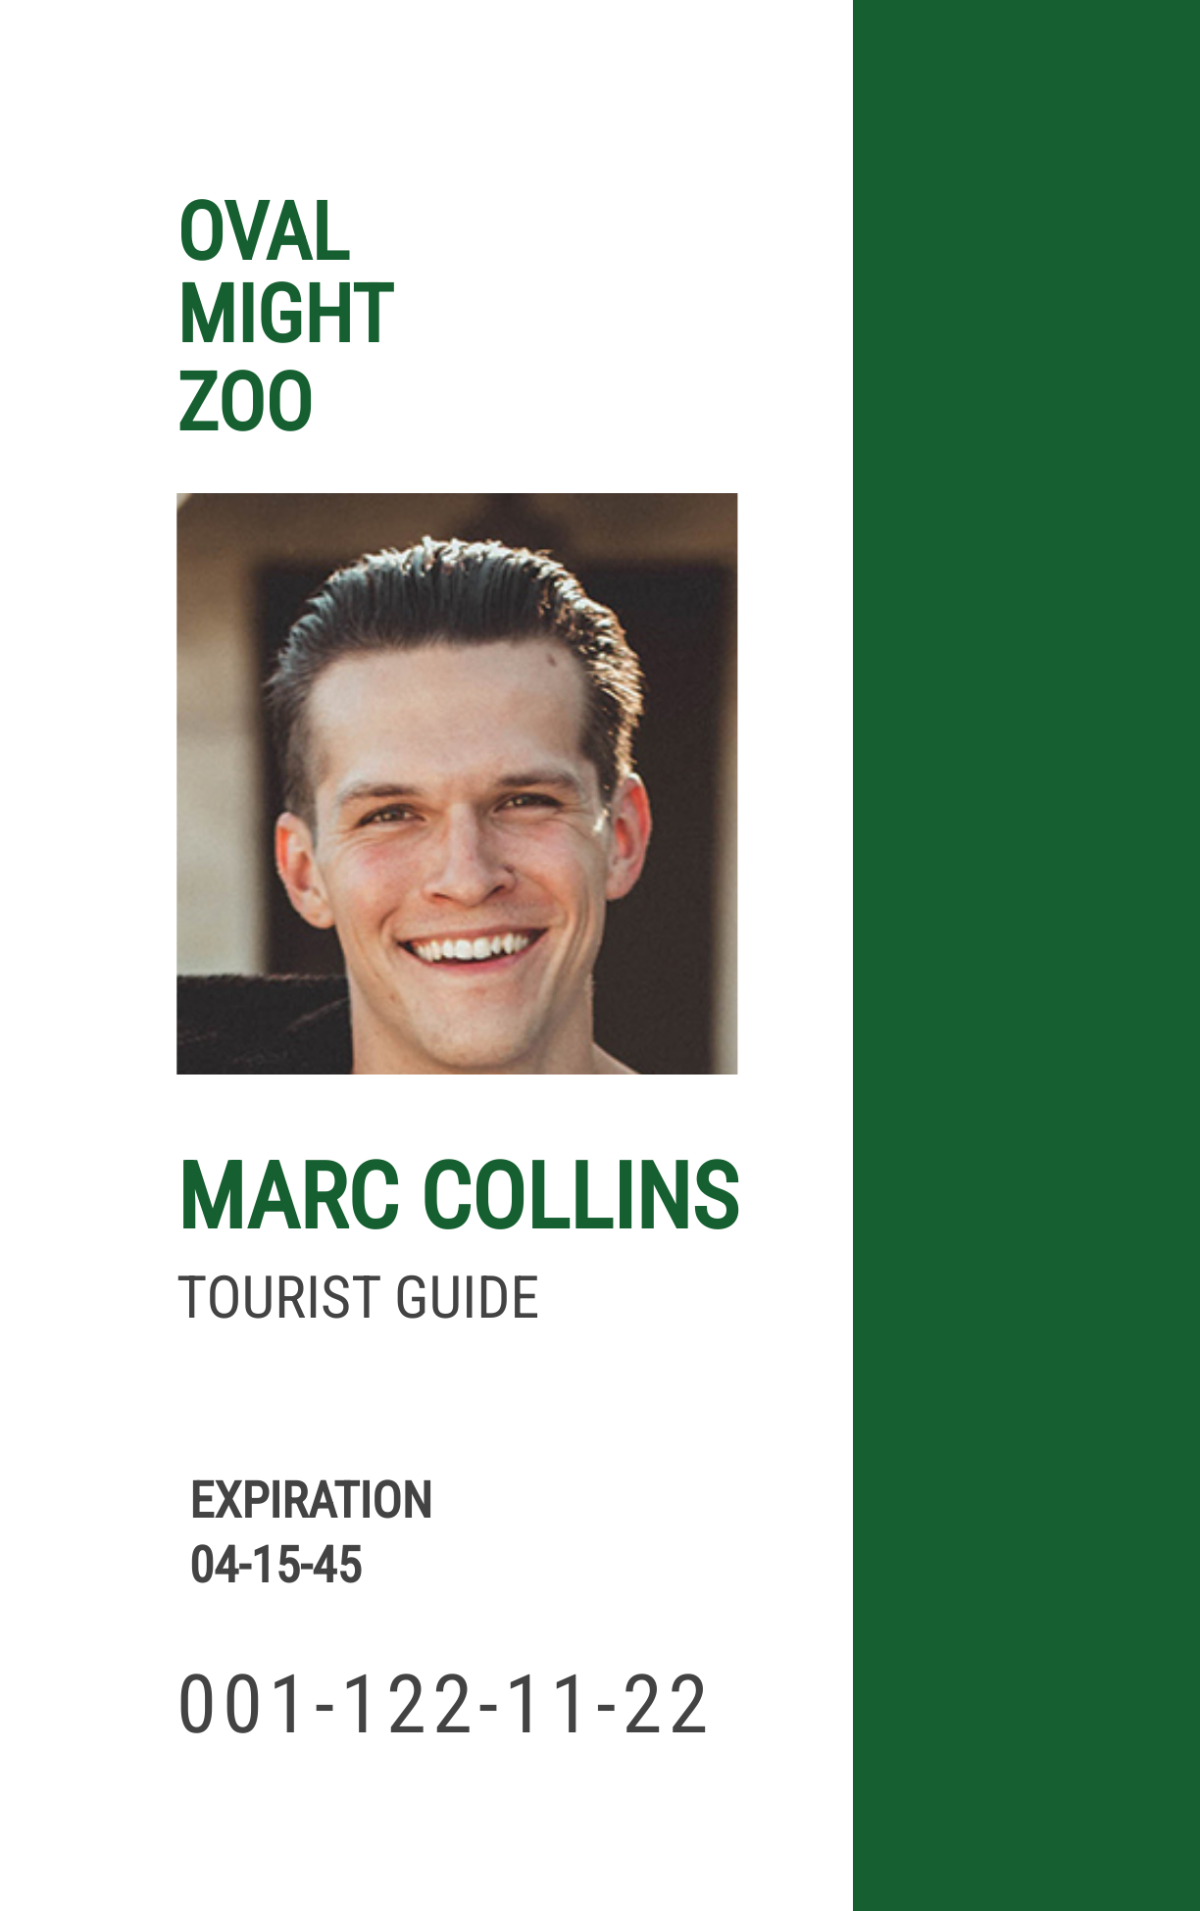 Tourist Guide ID Card Template